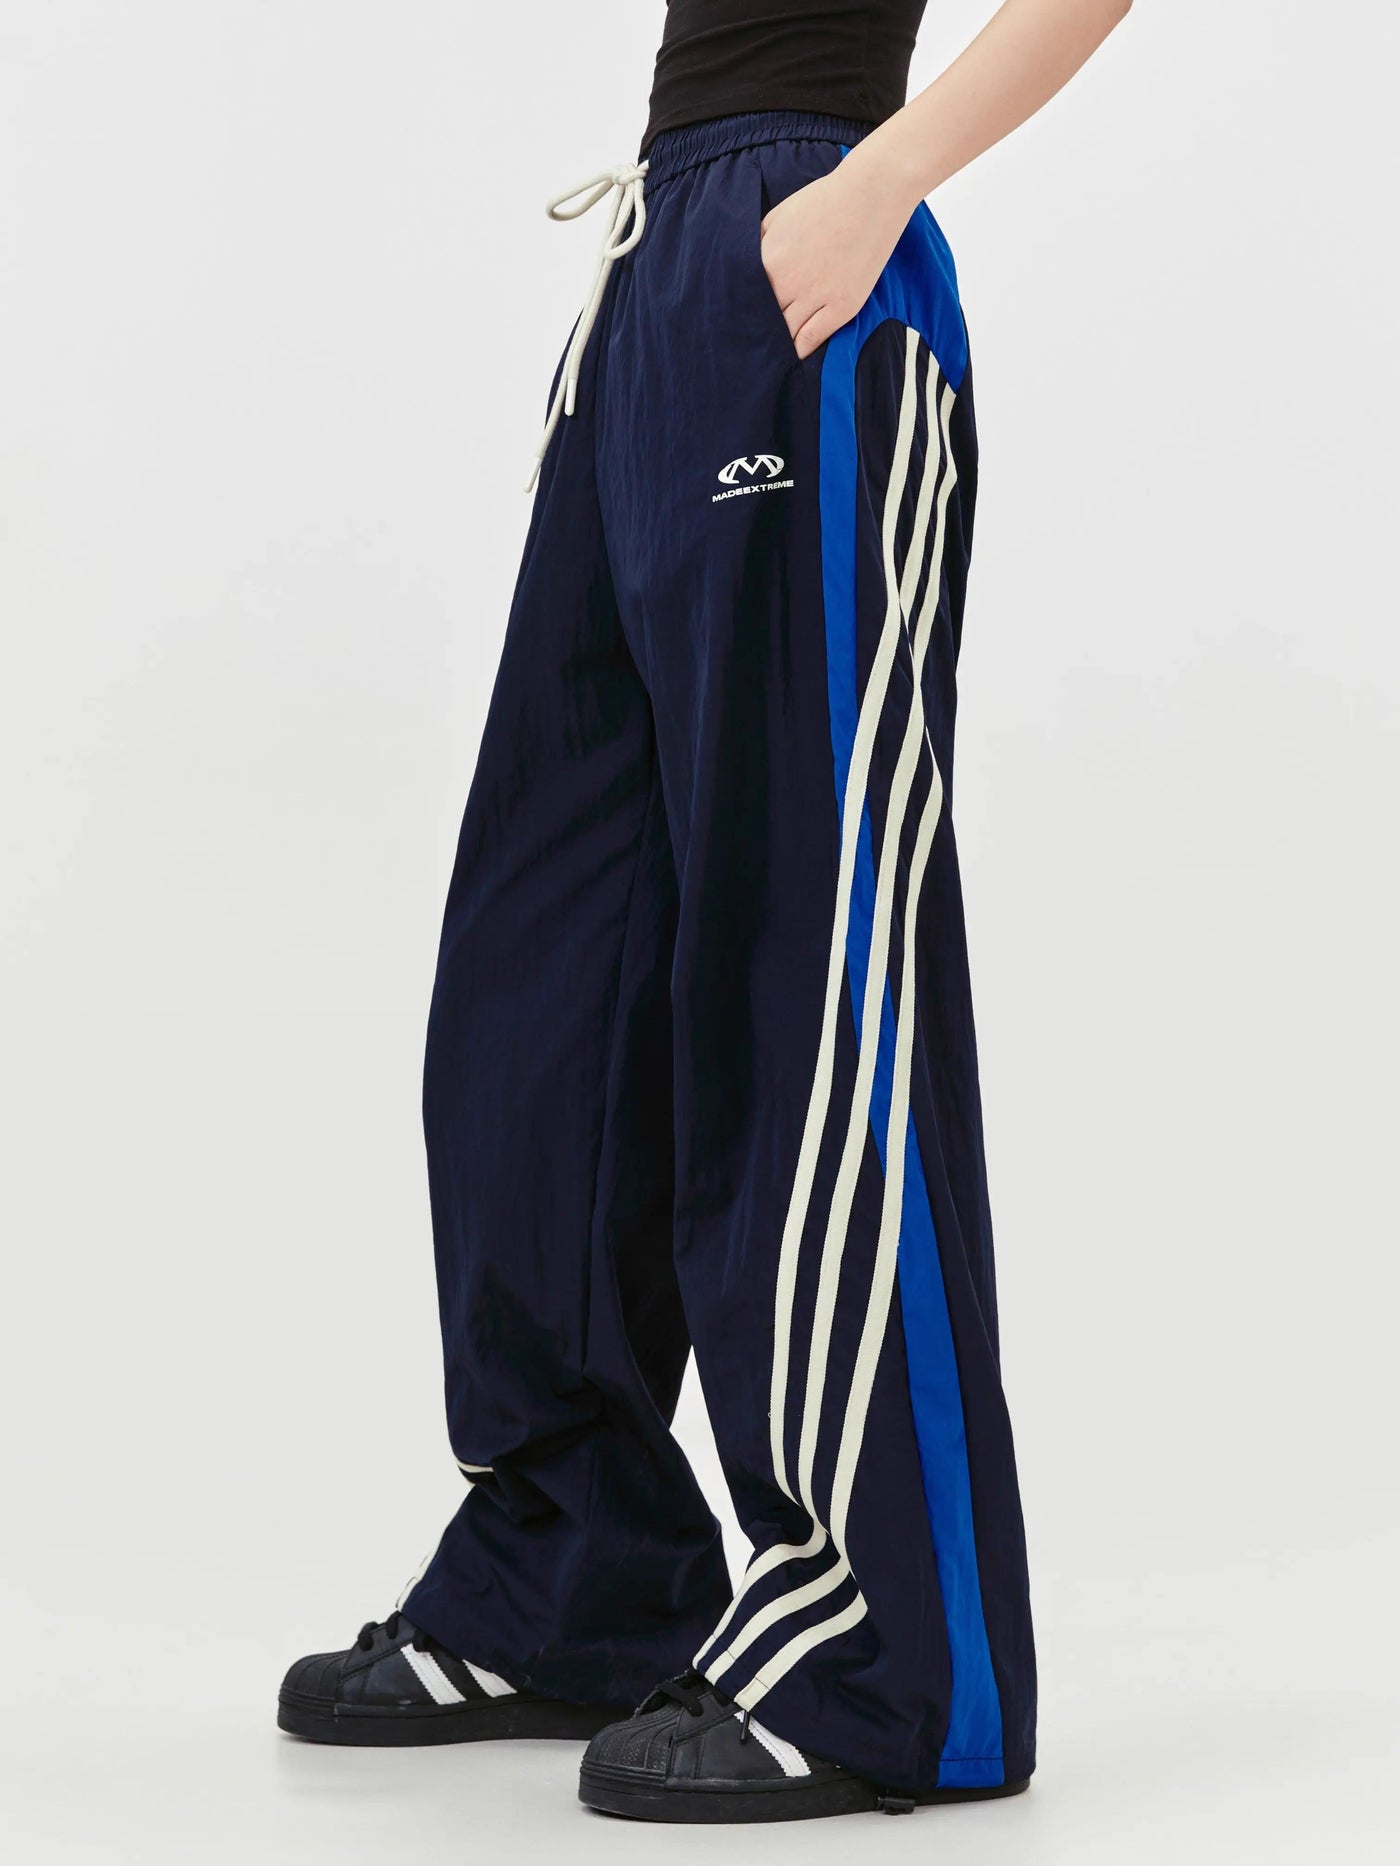 Elastic Sporty Striped Track Pants Korean Street Fashion Pants By Made Extreme Shop Online at OH Vault